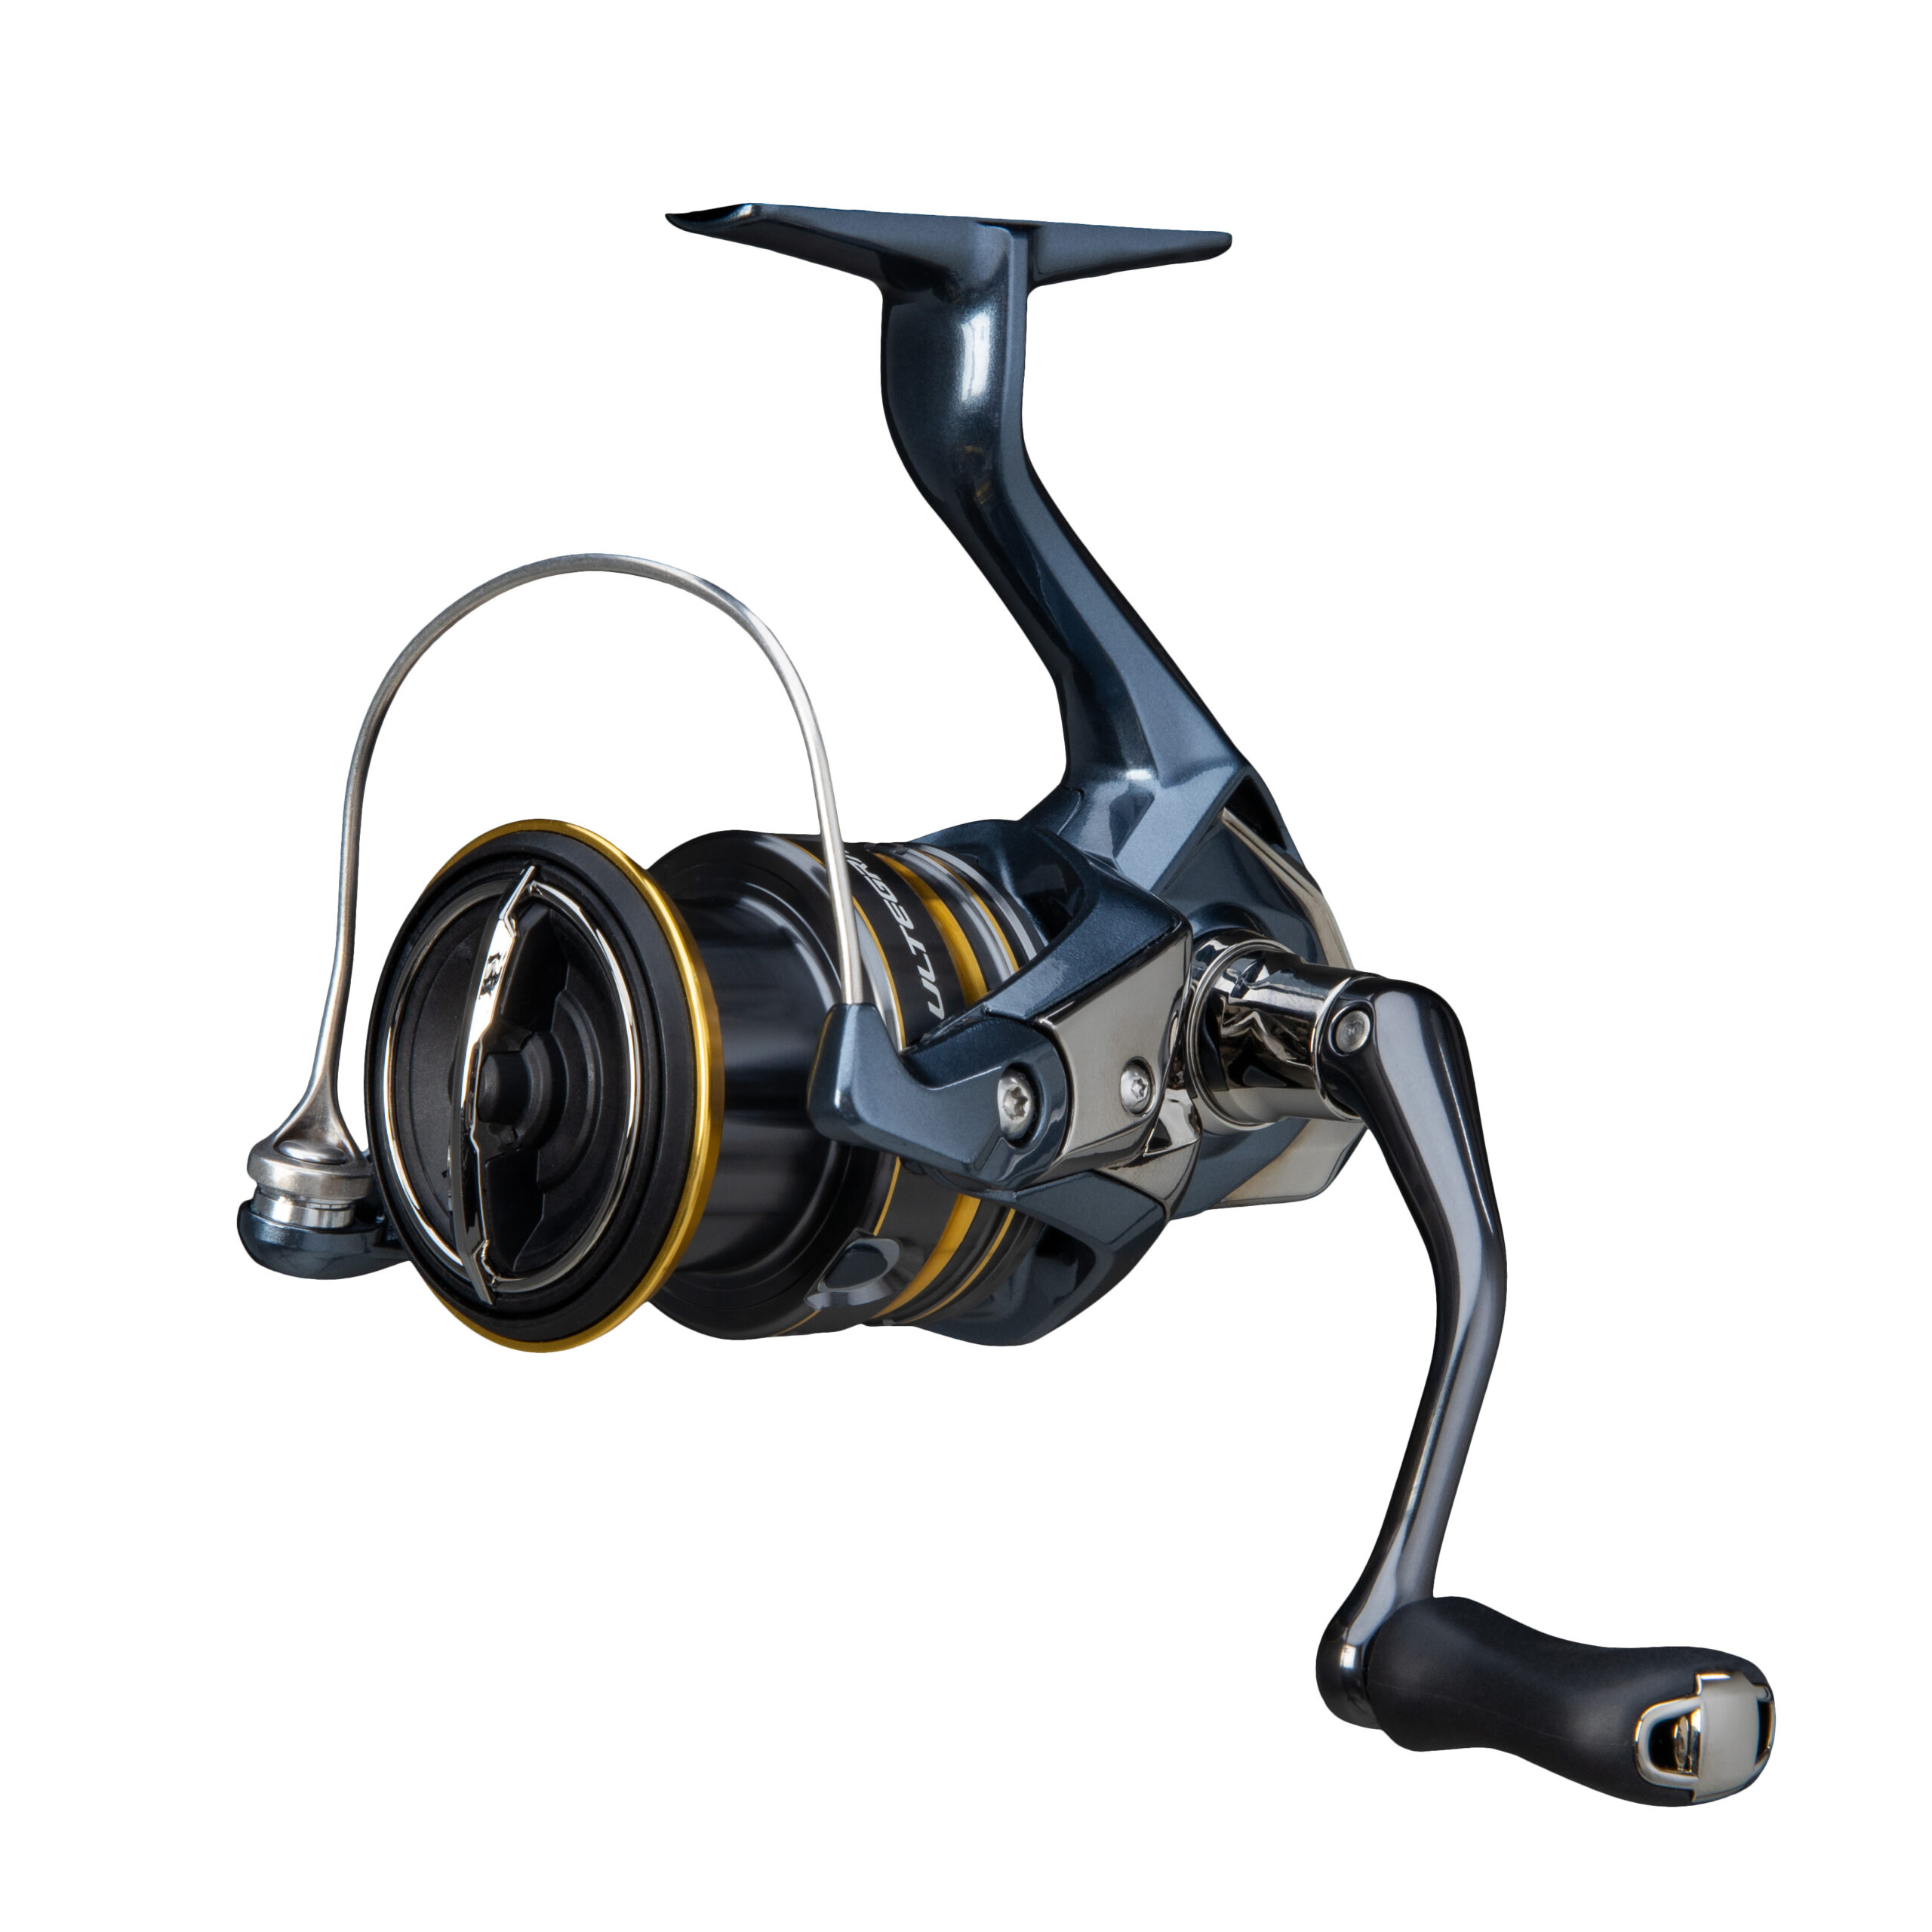 Shimano Redesigns the Ultegra Spinning Reel – $150